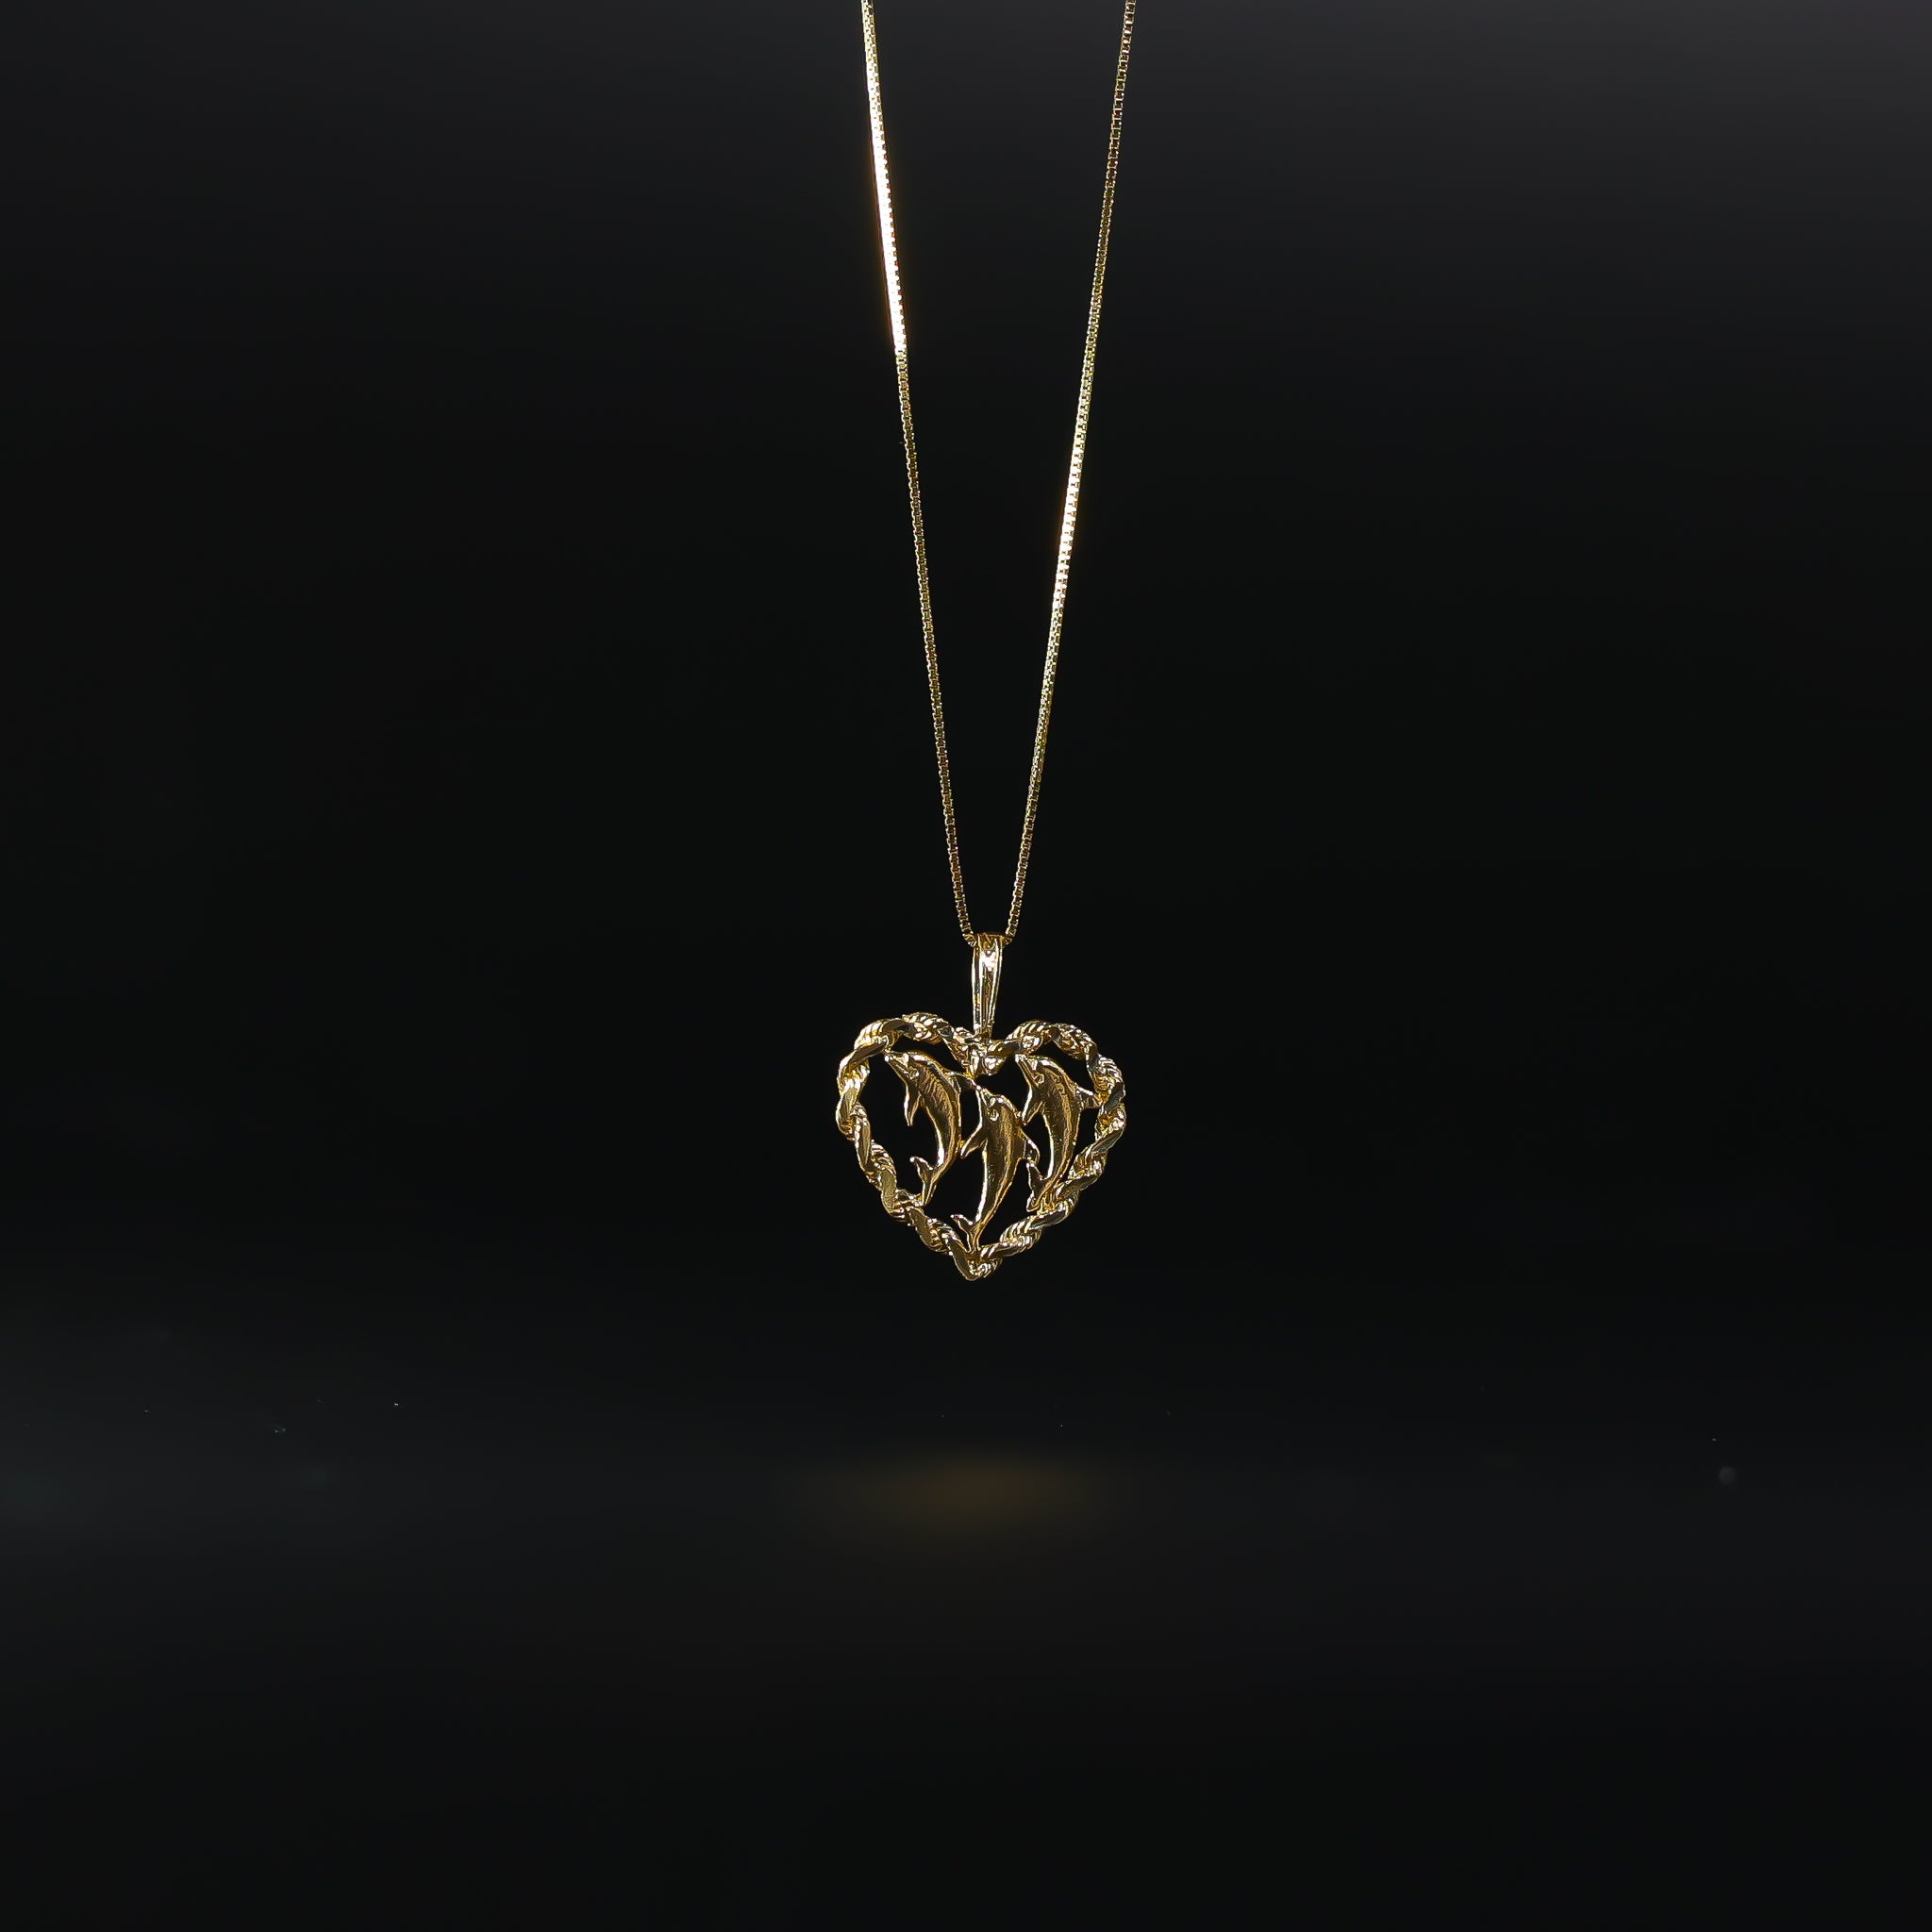 Gold Triple Dolphin Heart Pendant Model-1677 - Charlie & Co. Jewelry